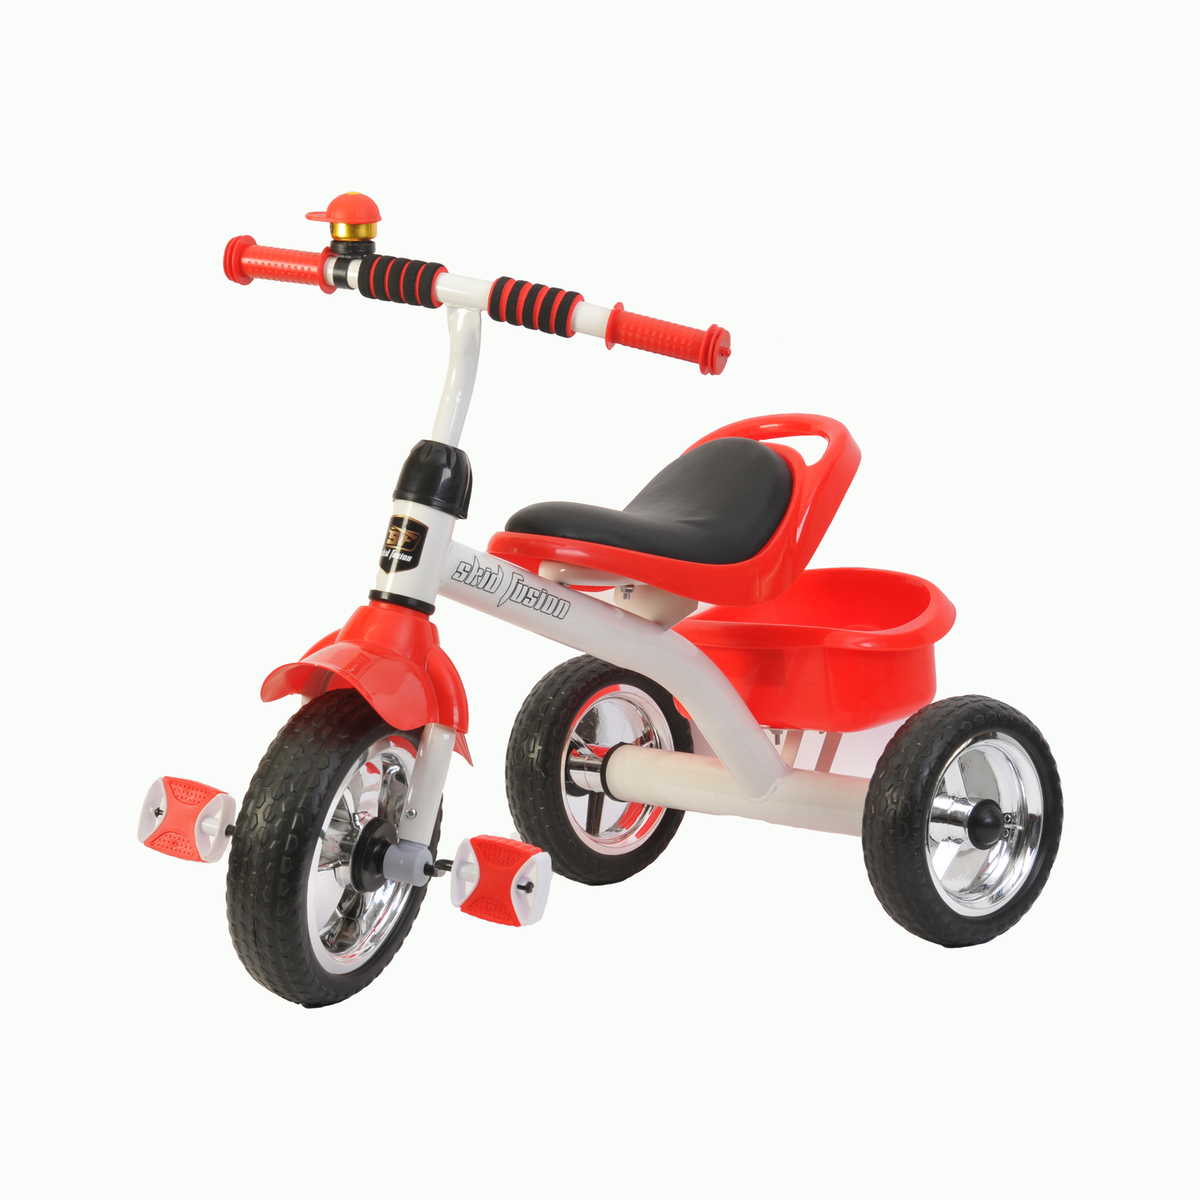 Skid Fusion Tricycle YQM-688 Assorted Color